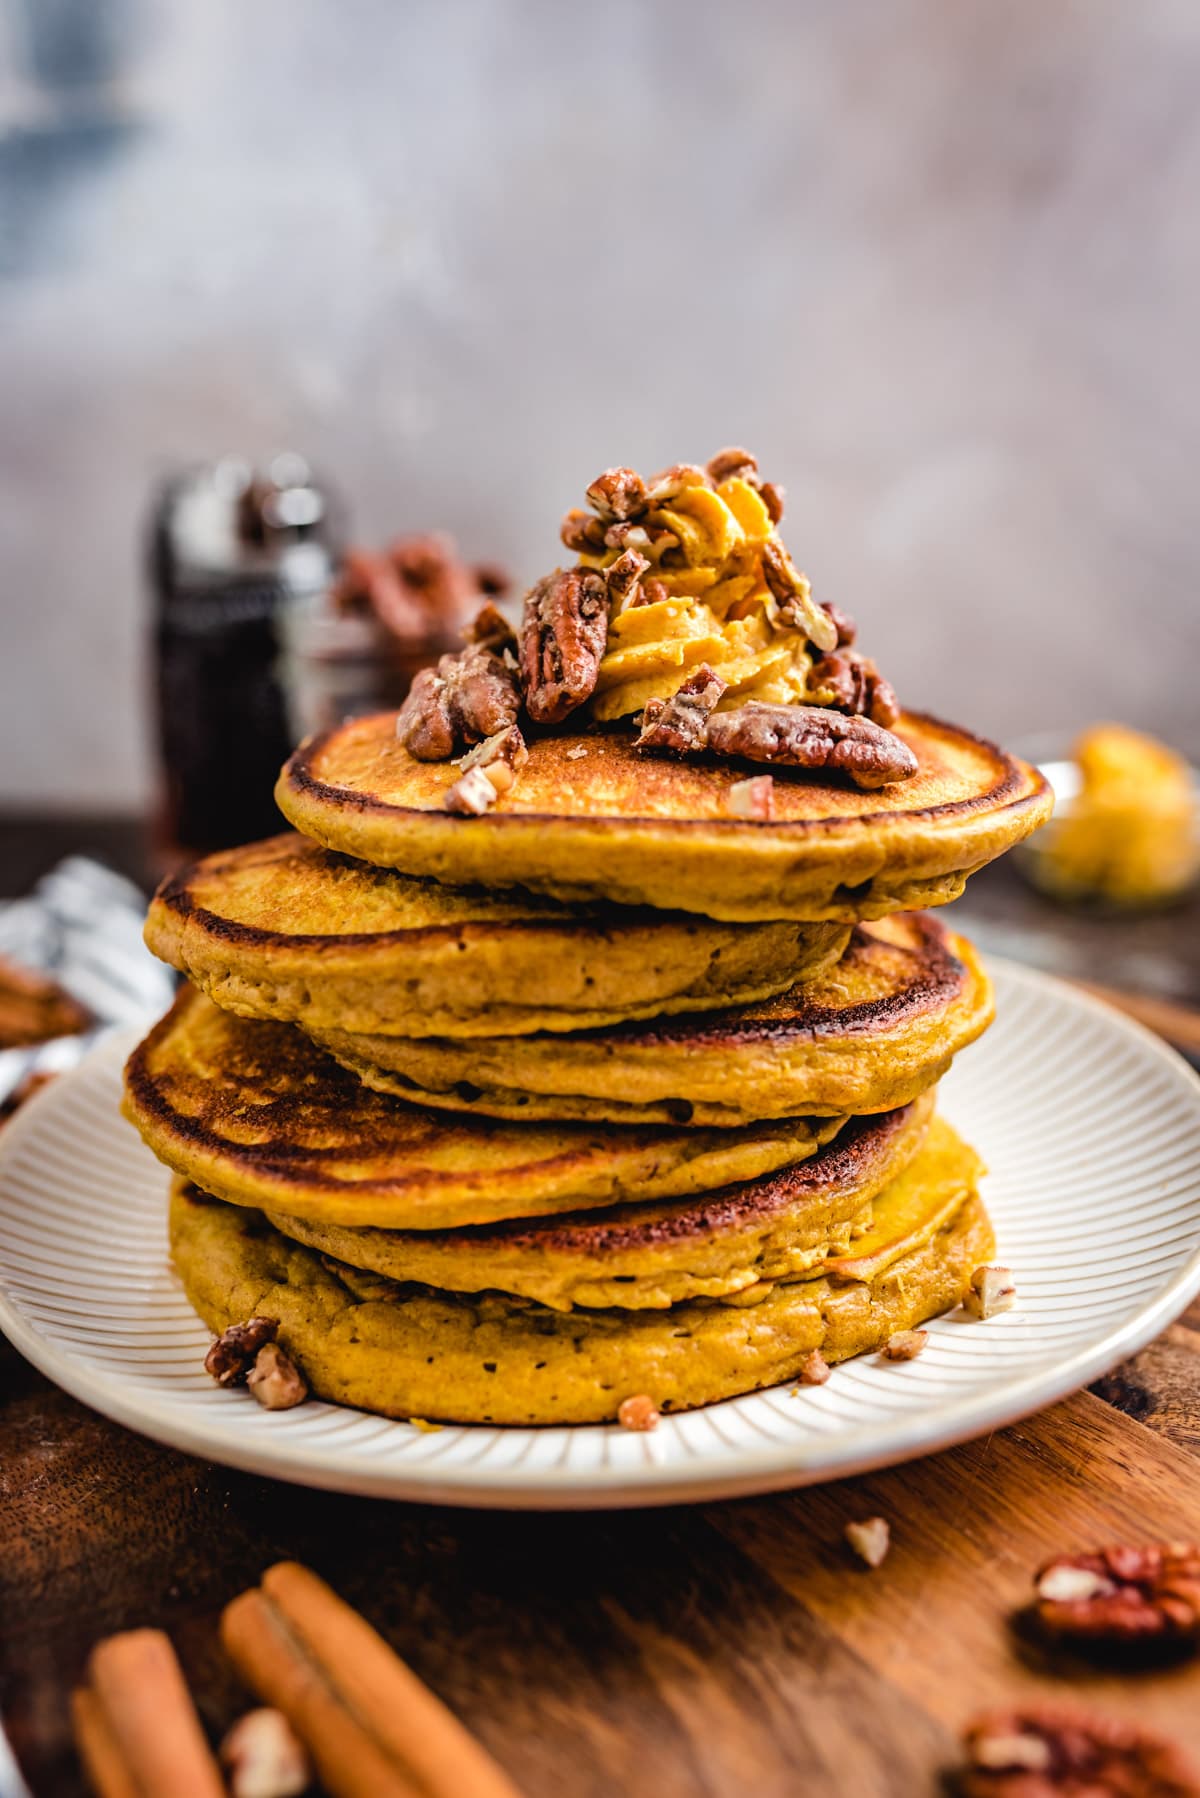 The best pumpkin pancakes incorporate dense, moist canned pumpkin while keeping the end product fluffy and airy. This recipe manages to do so while packing in tons of Fall flavor in the form of pumpkin spices and pumpkin flesh. The pancakes are warm, delicious, and you’ll want them every weekend of the chilly season!